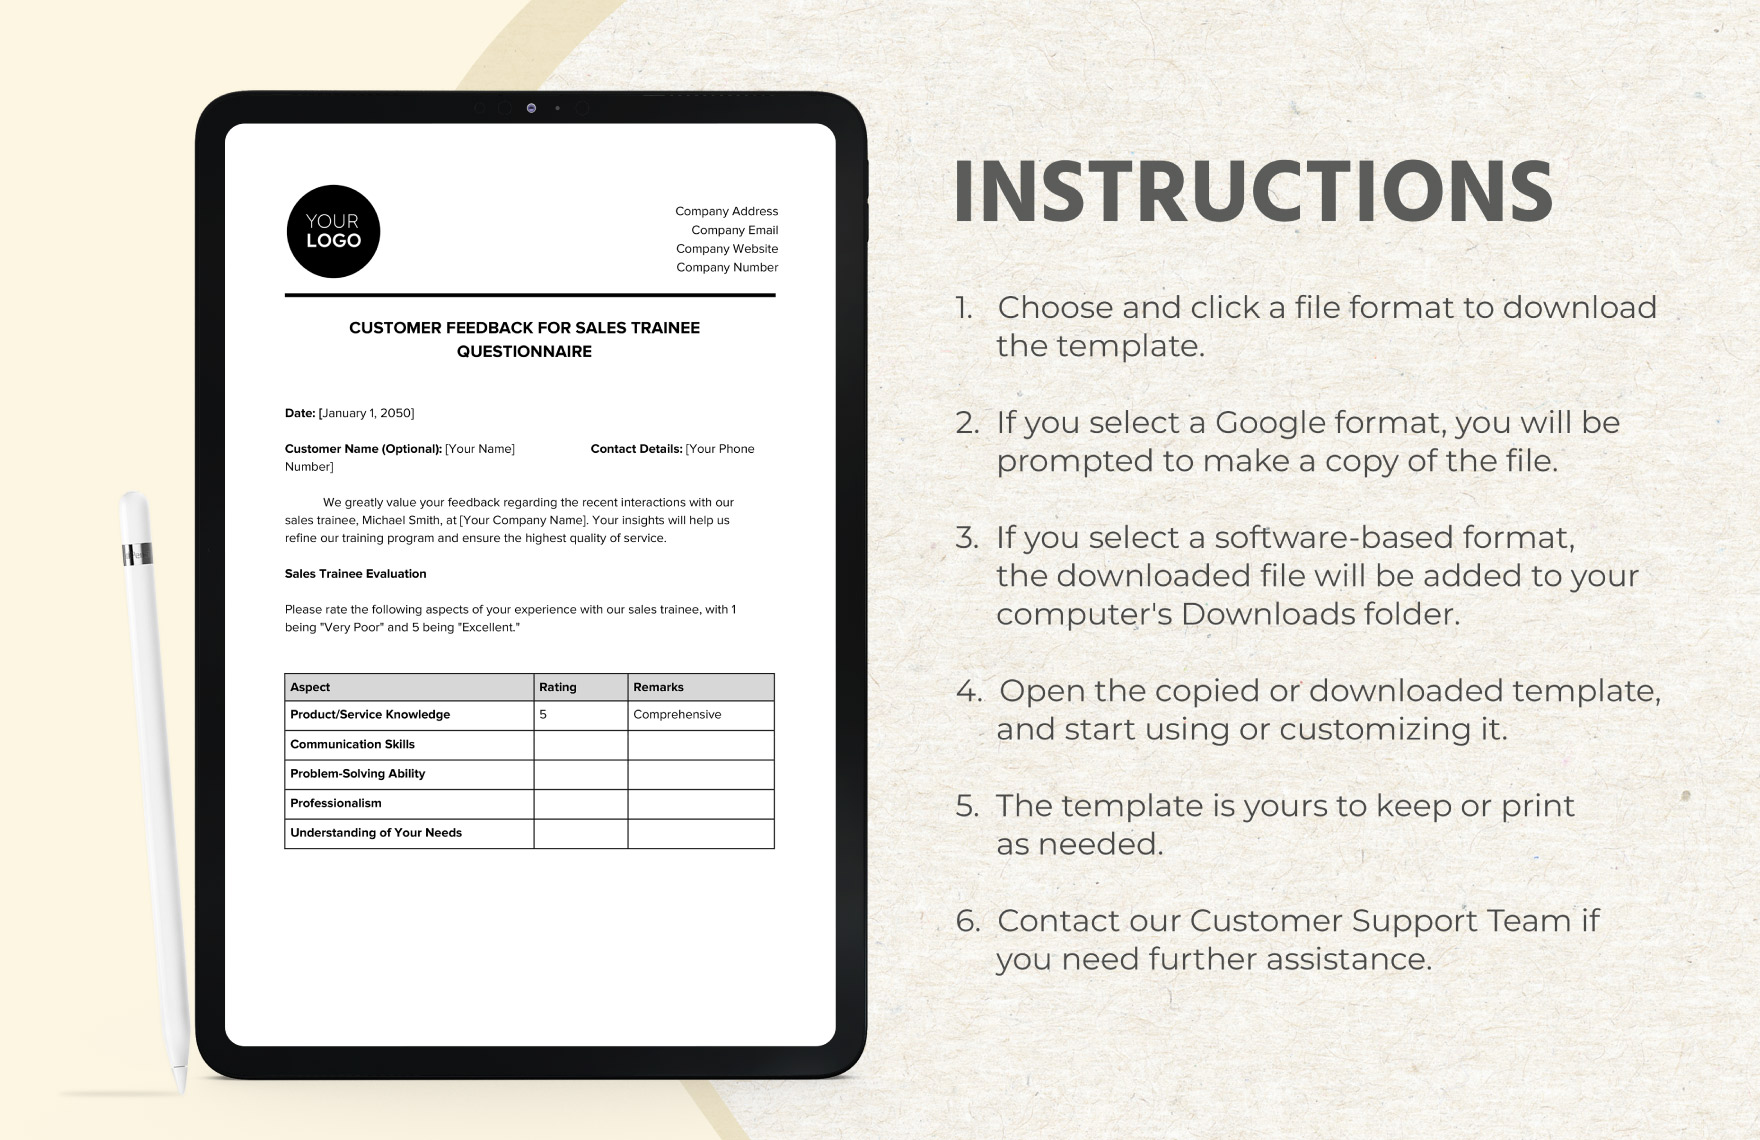 Customer Feedback for Sales Trainee Questionnaire Template